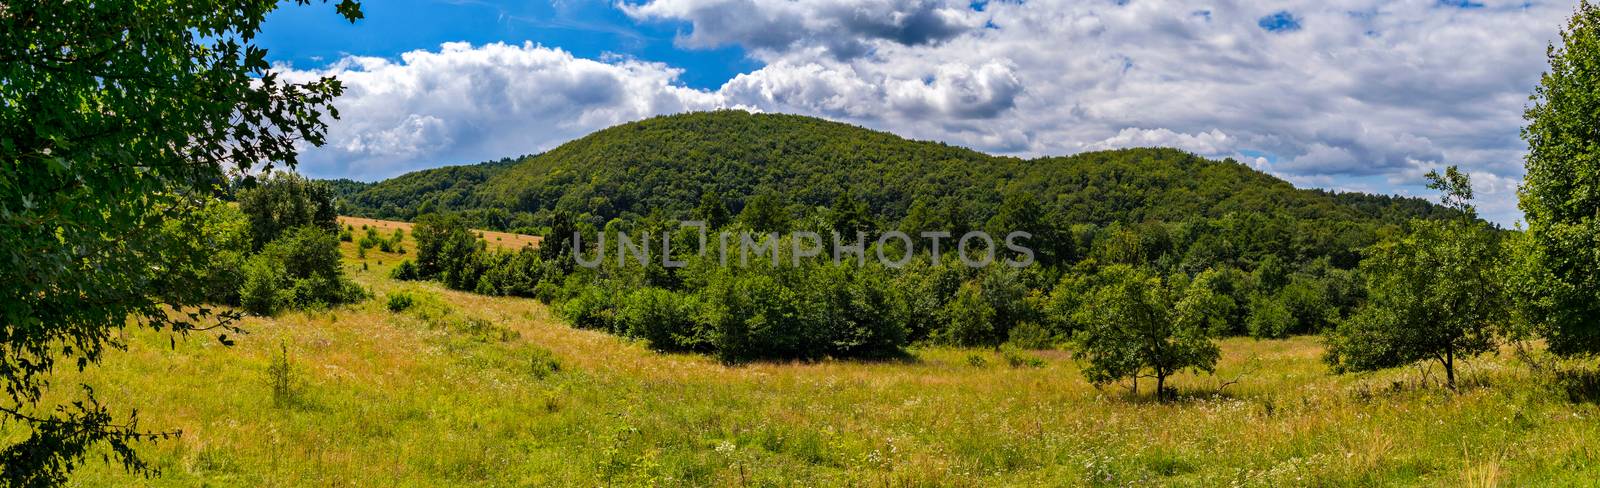 mountain, covered with green trees, under a blue sky with clouds by Adamchuk